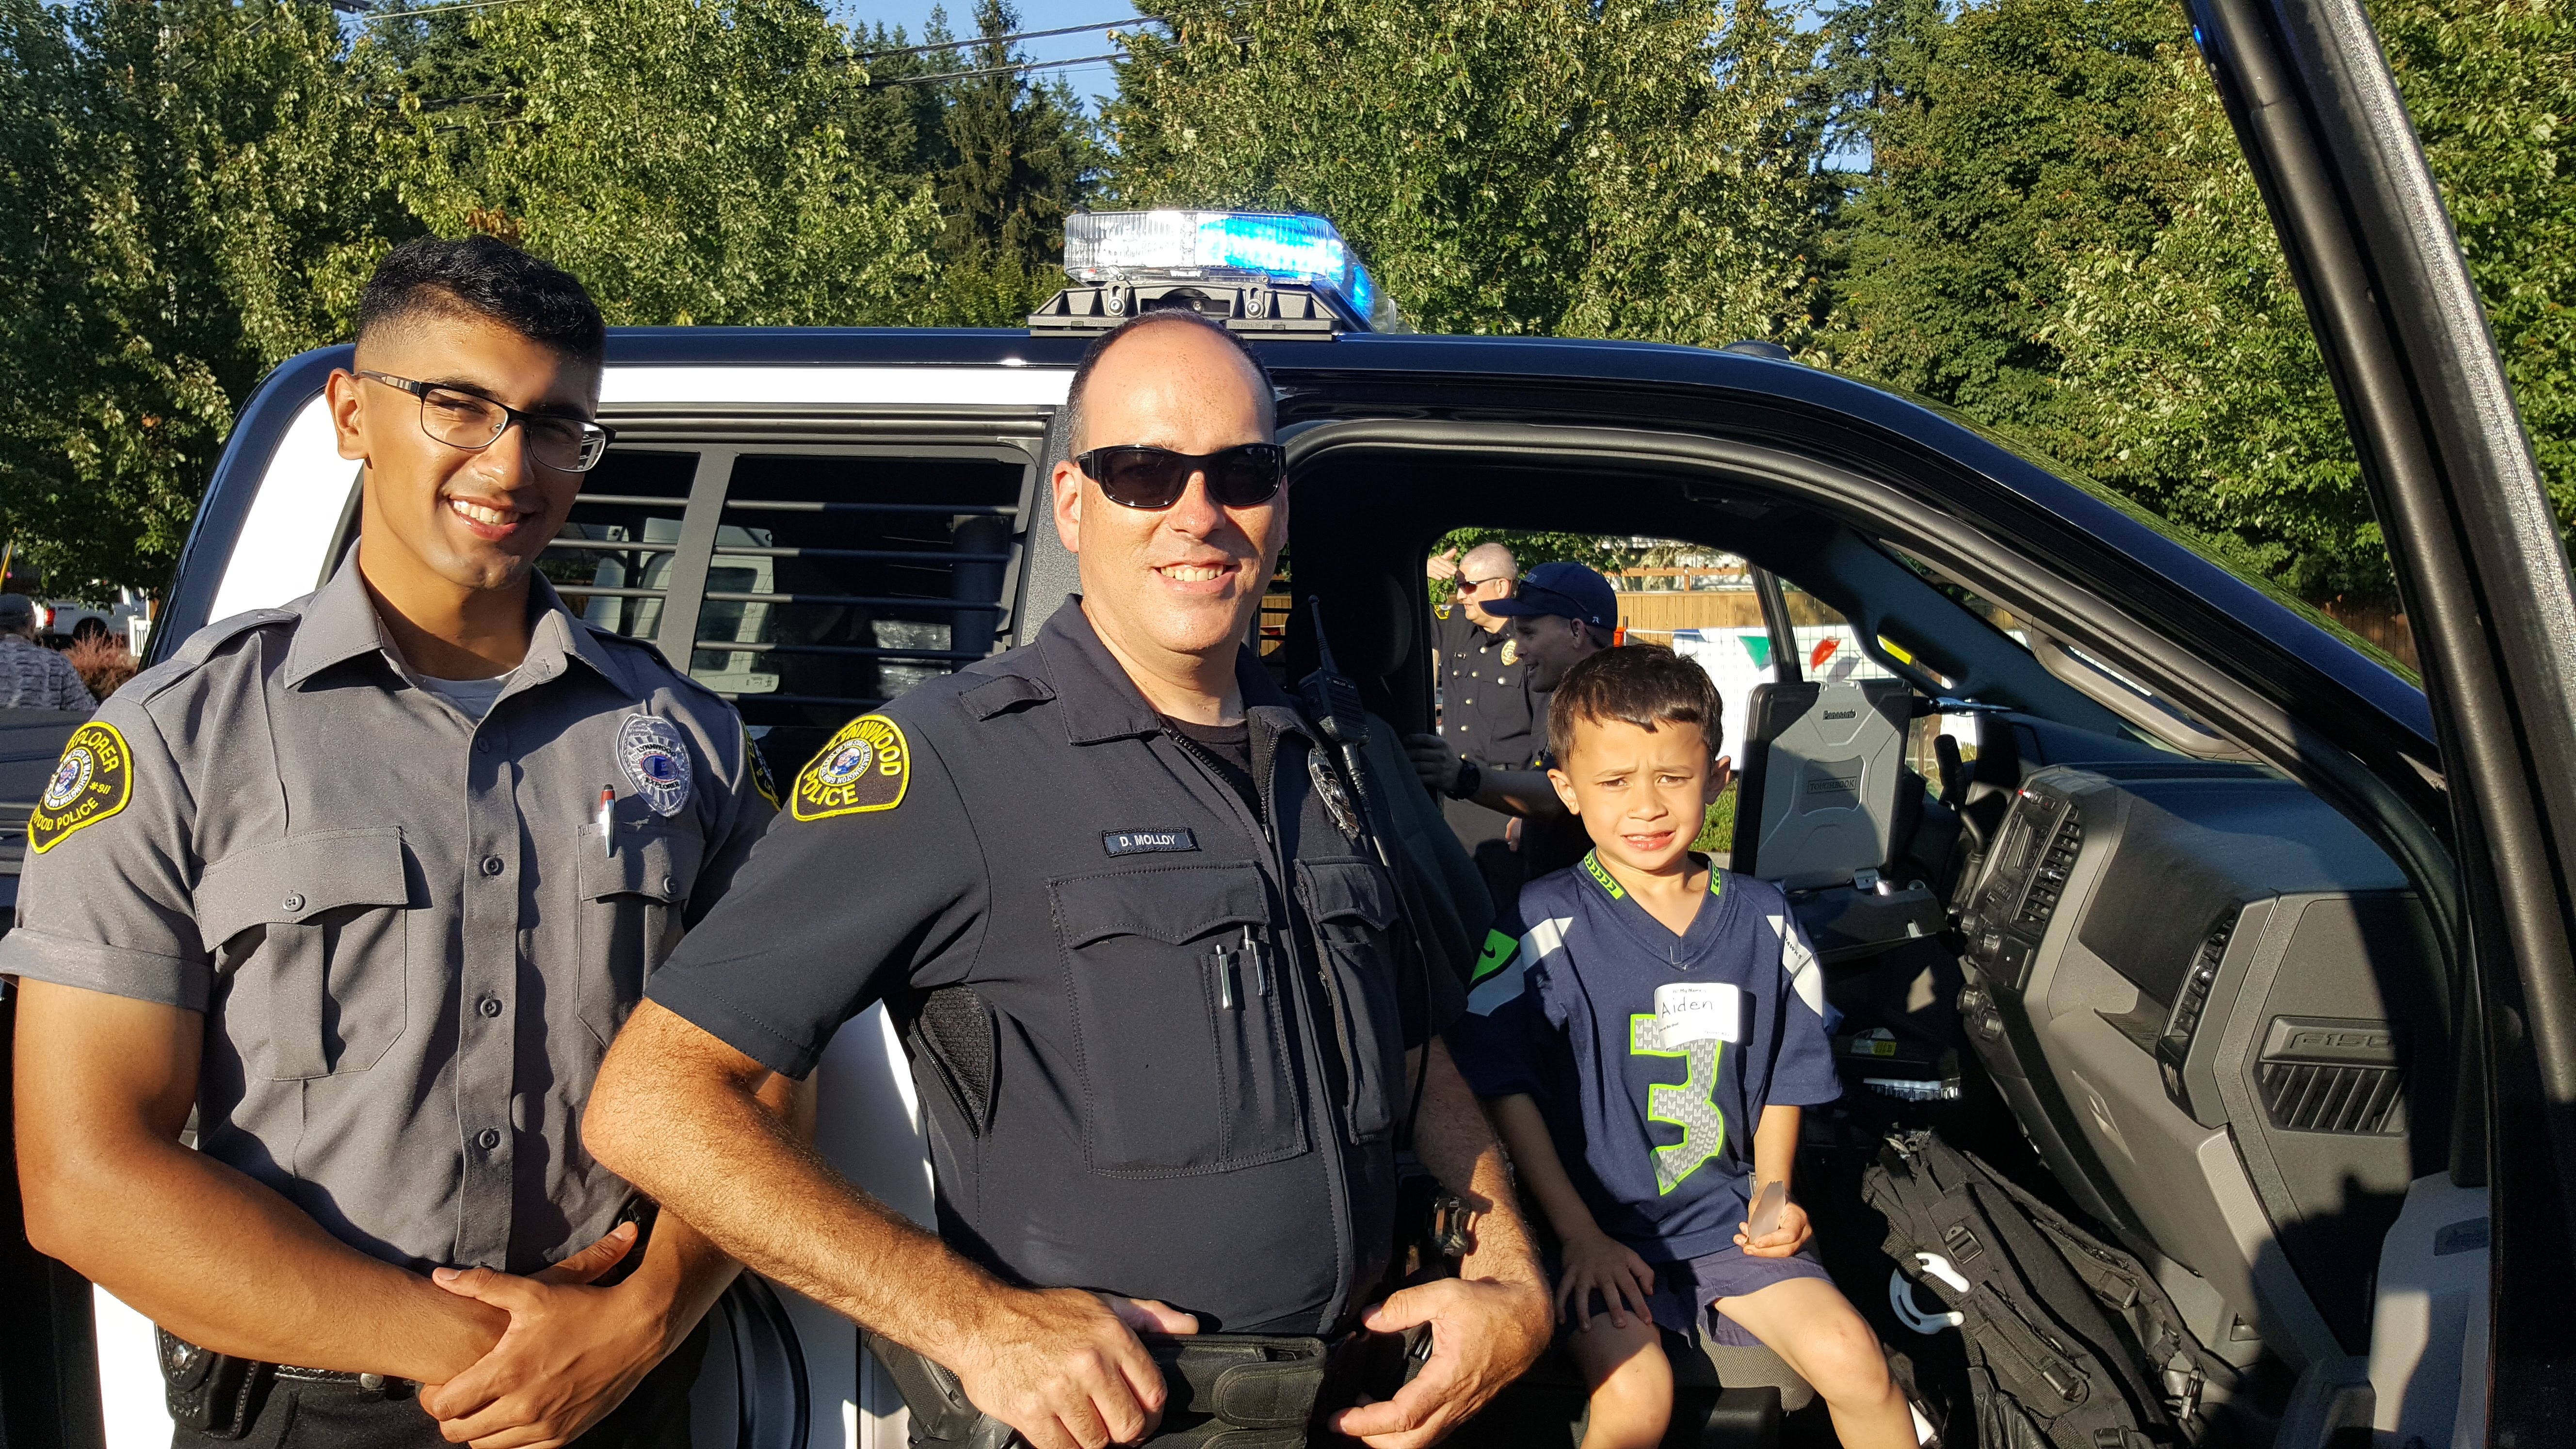 Officer and Explorer at 2019 National Night Out